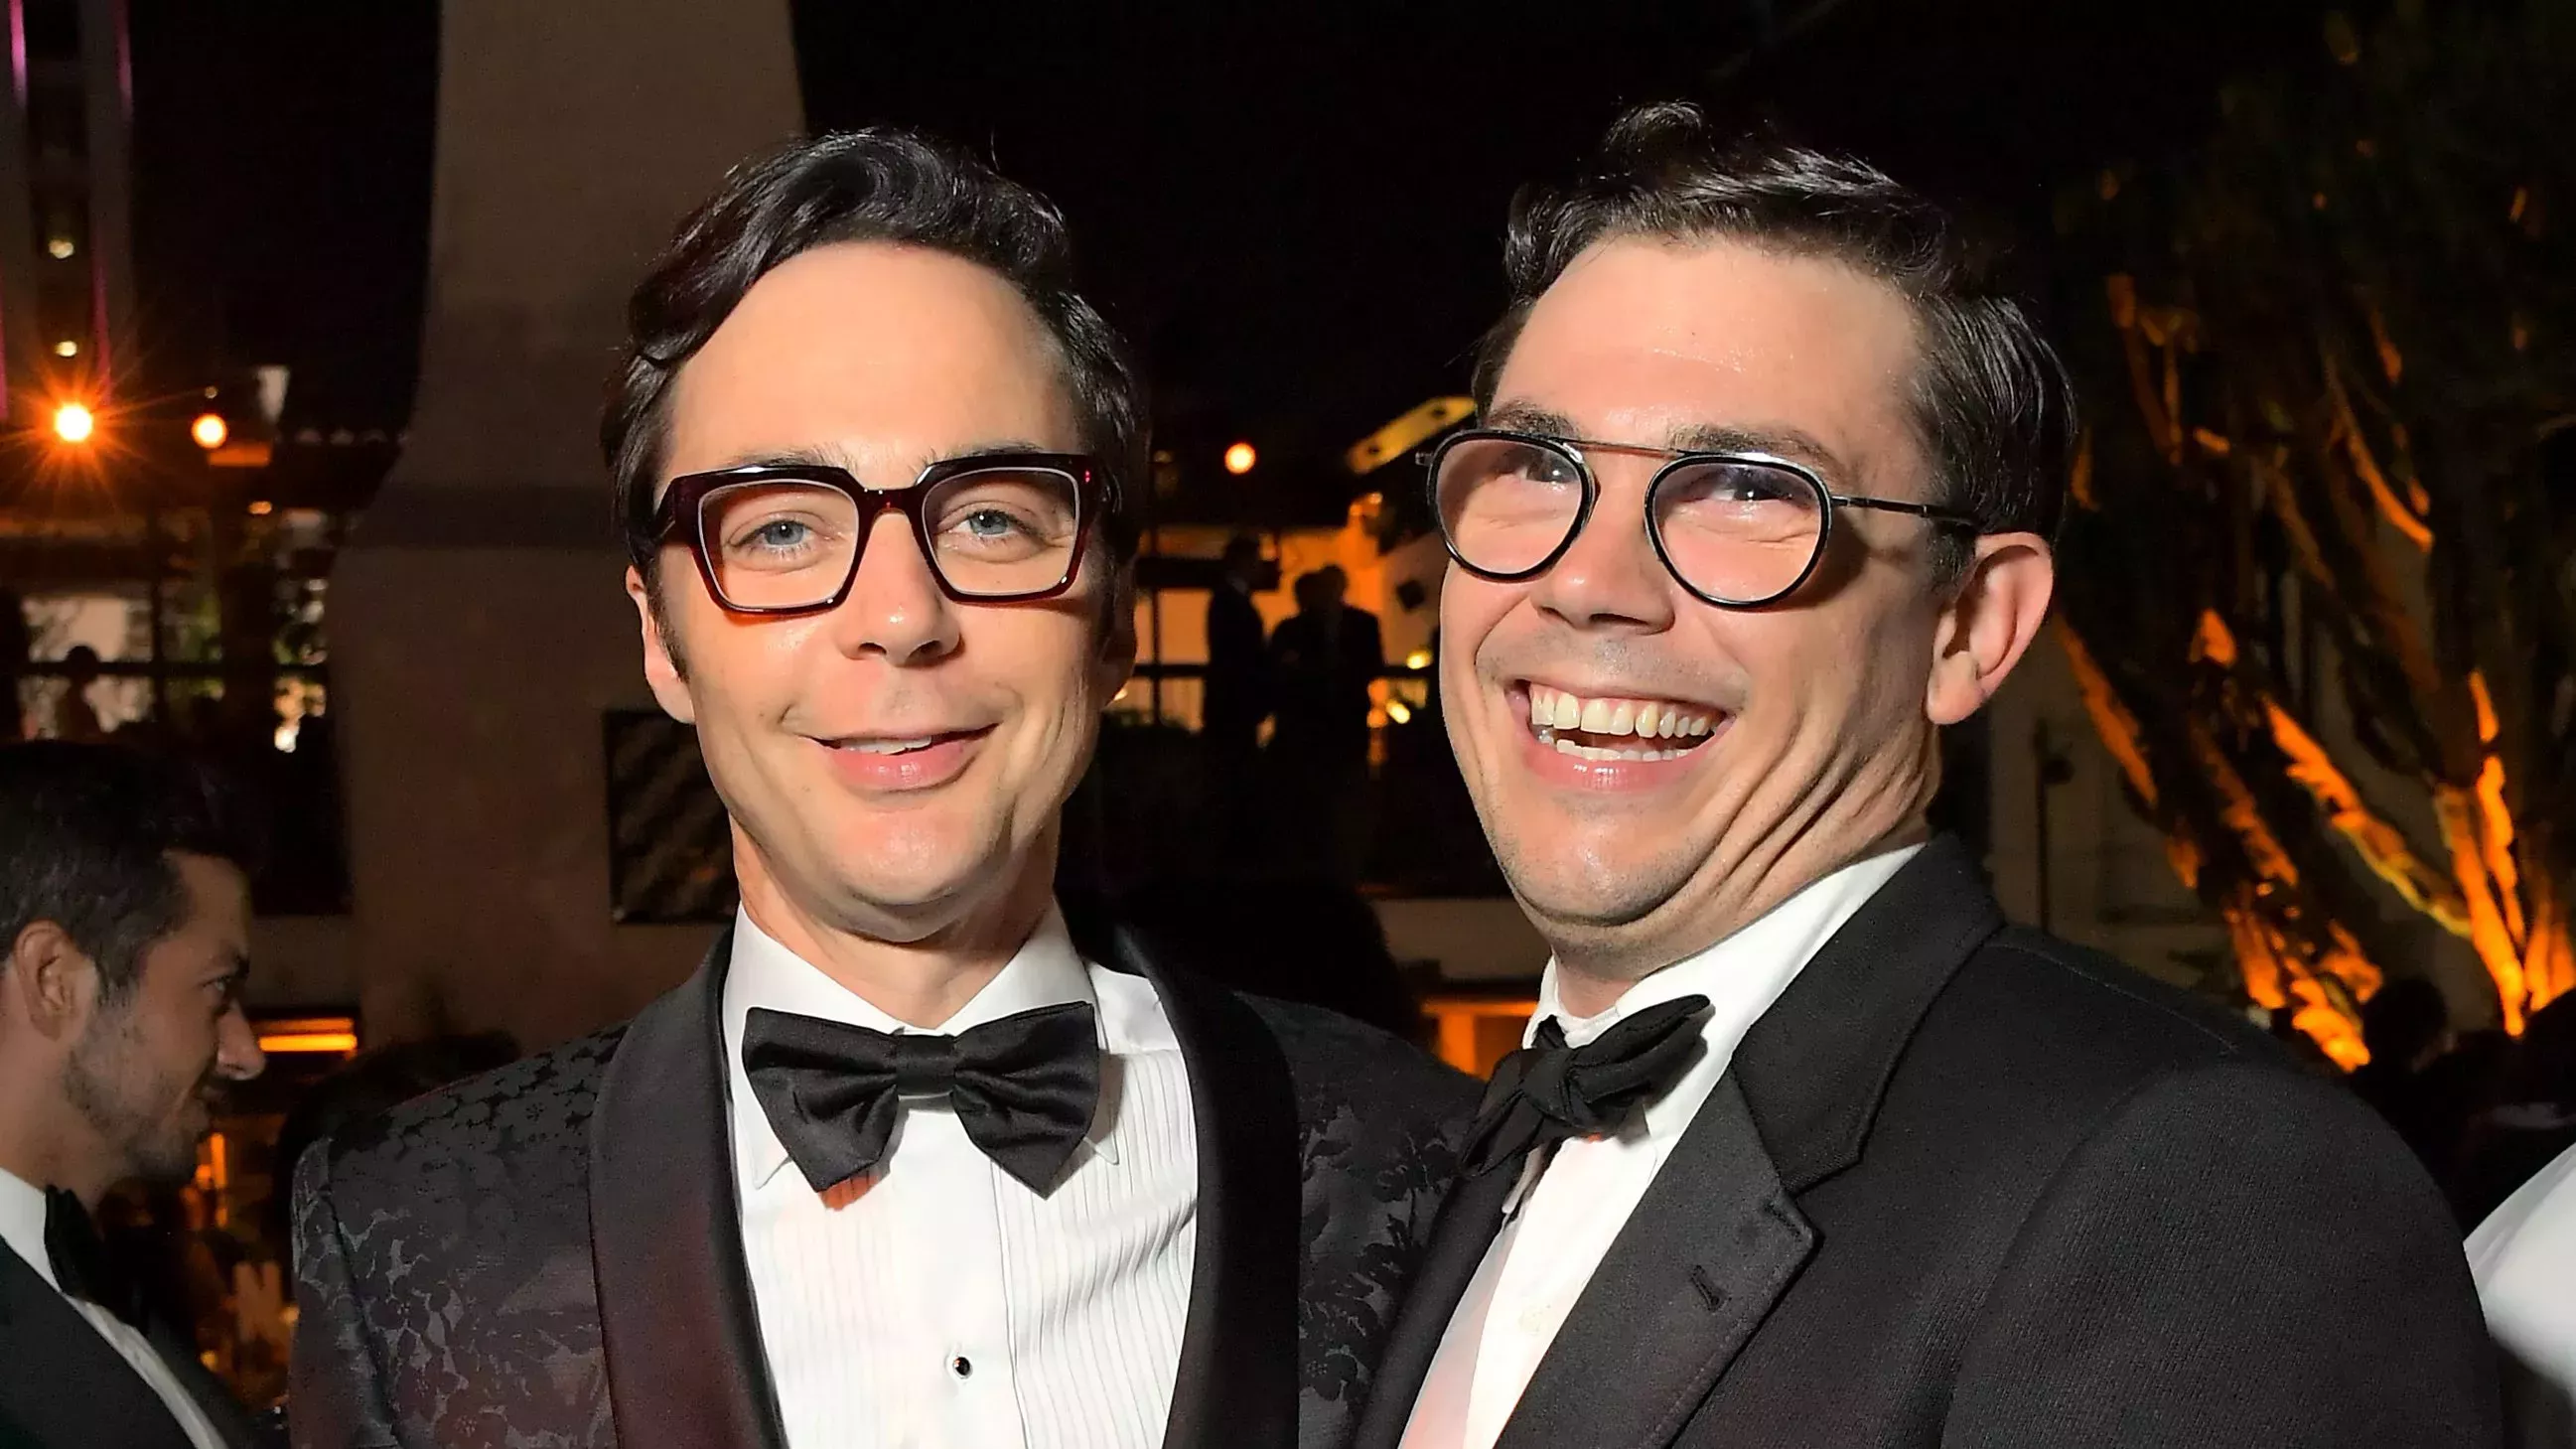 

	
		Ryan O'Connell y Jim Parsons protagonizan la comedia 'Just by Looking at Him'(EXCLUSIVA)
	
	